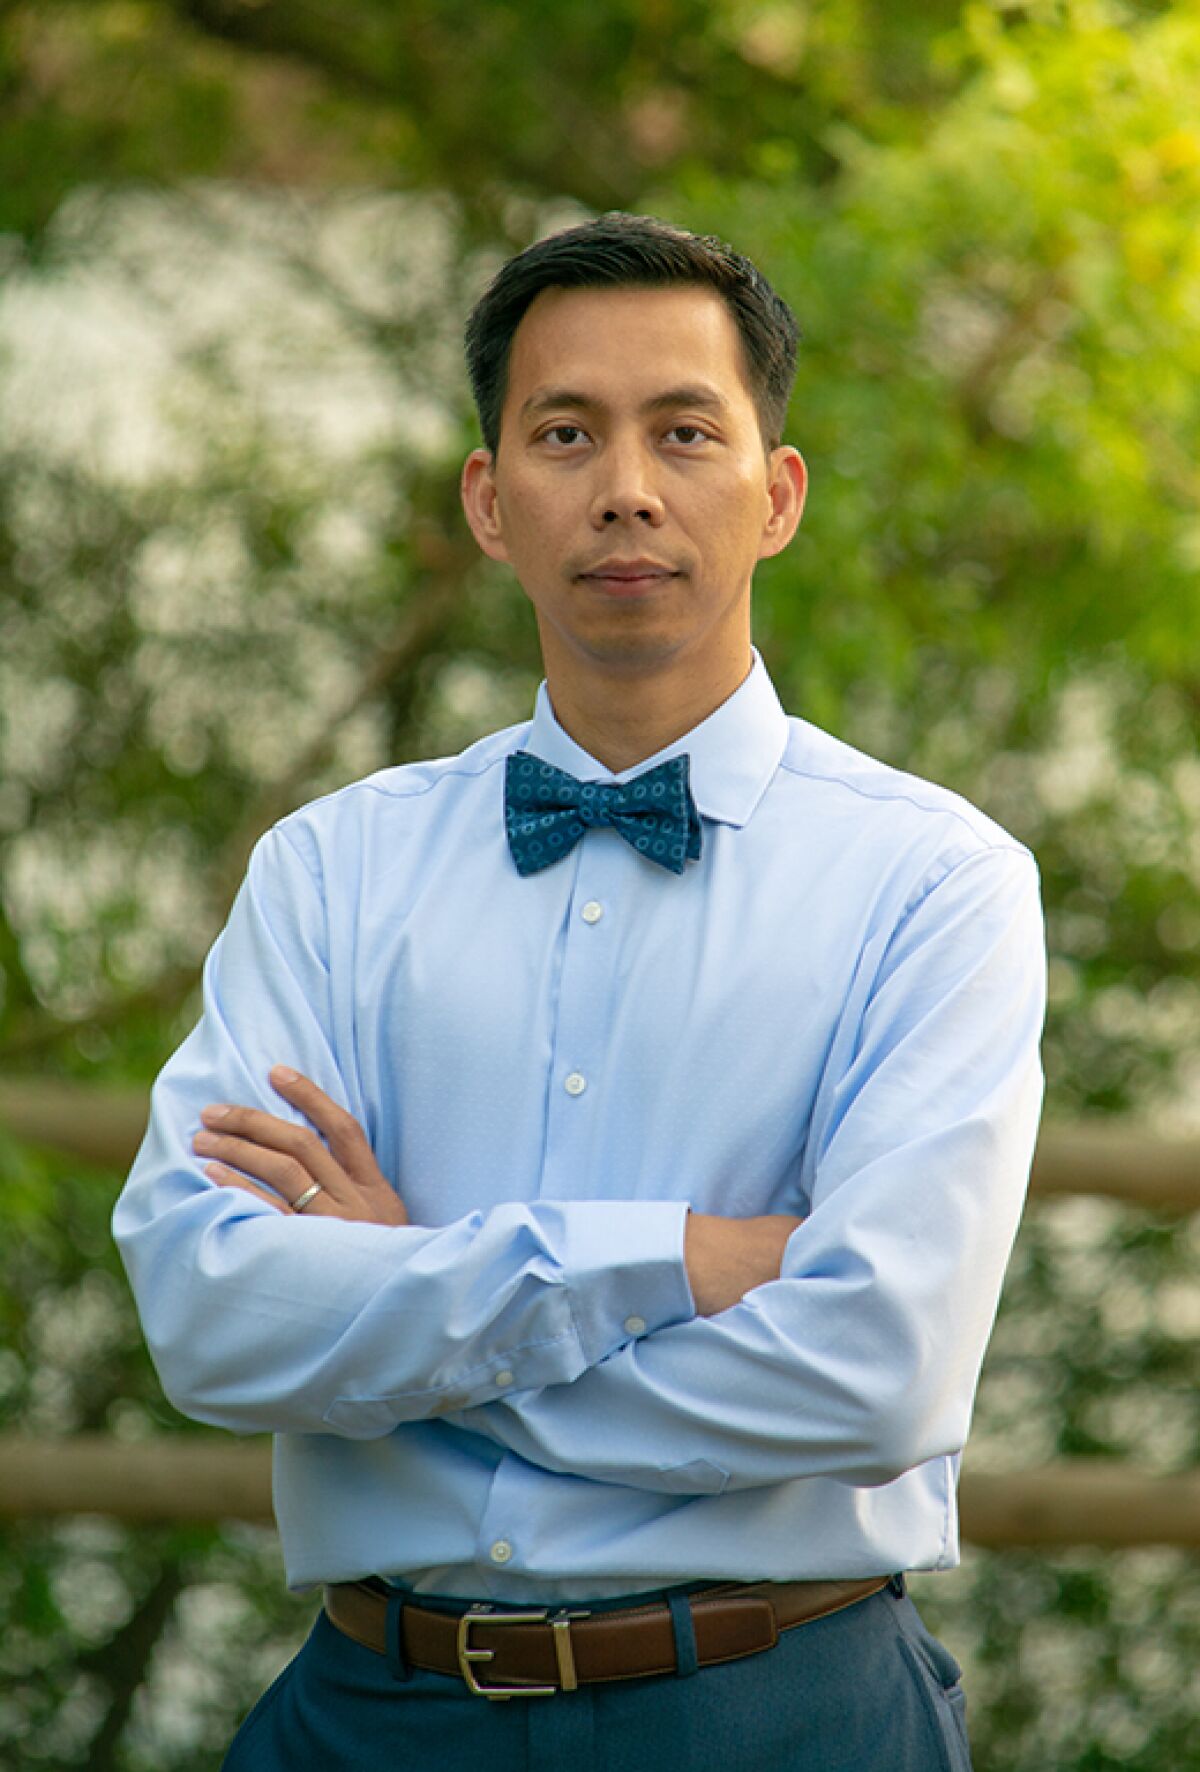 Paul Hoang founded Viet-CARE